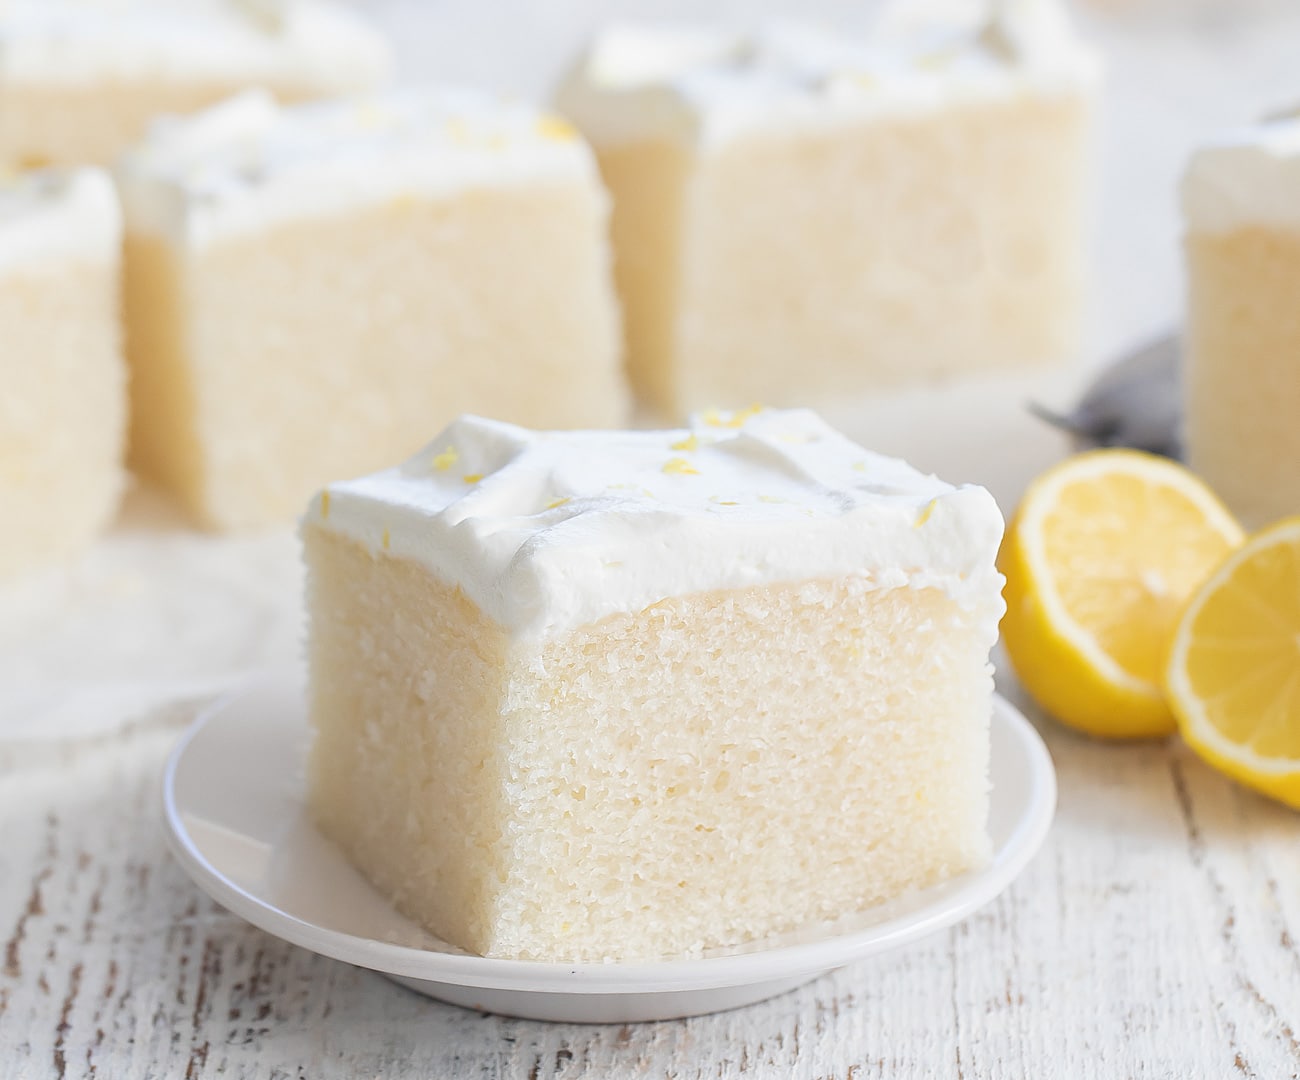 Best Instant Pot Lemon Cake Recipe - Kitchen Fun With My 3 Sons